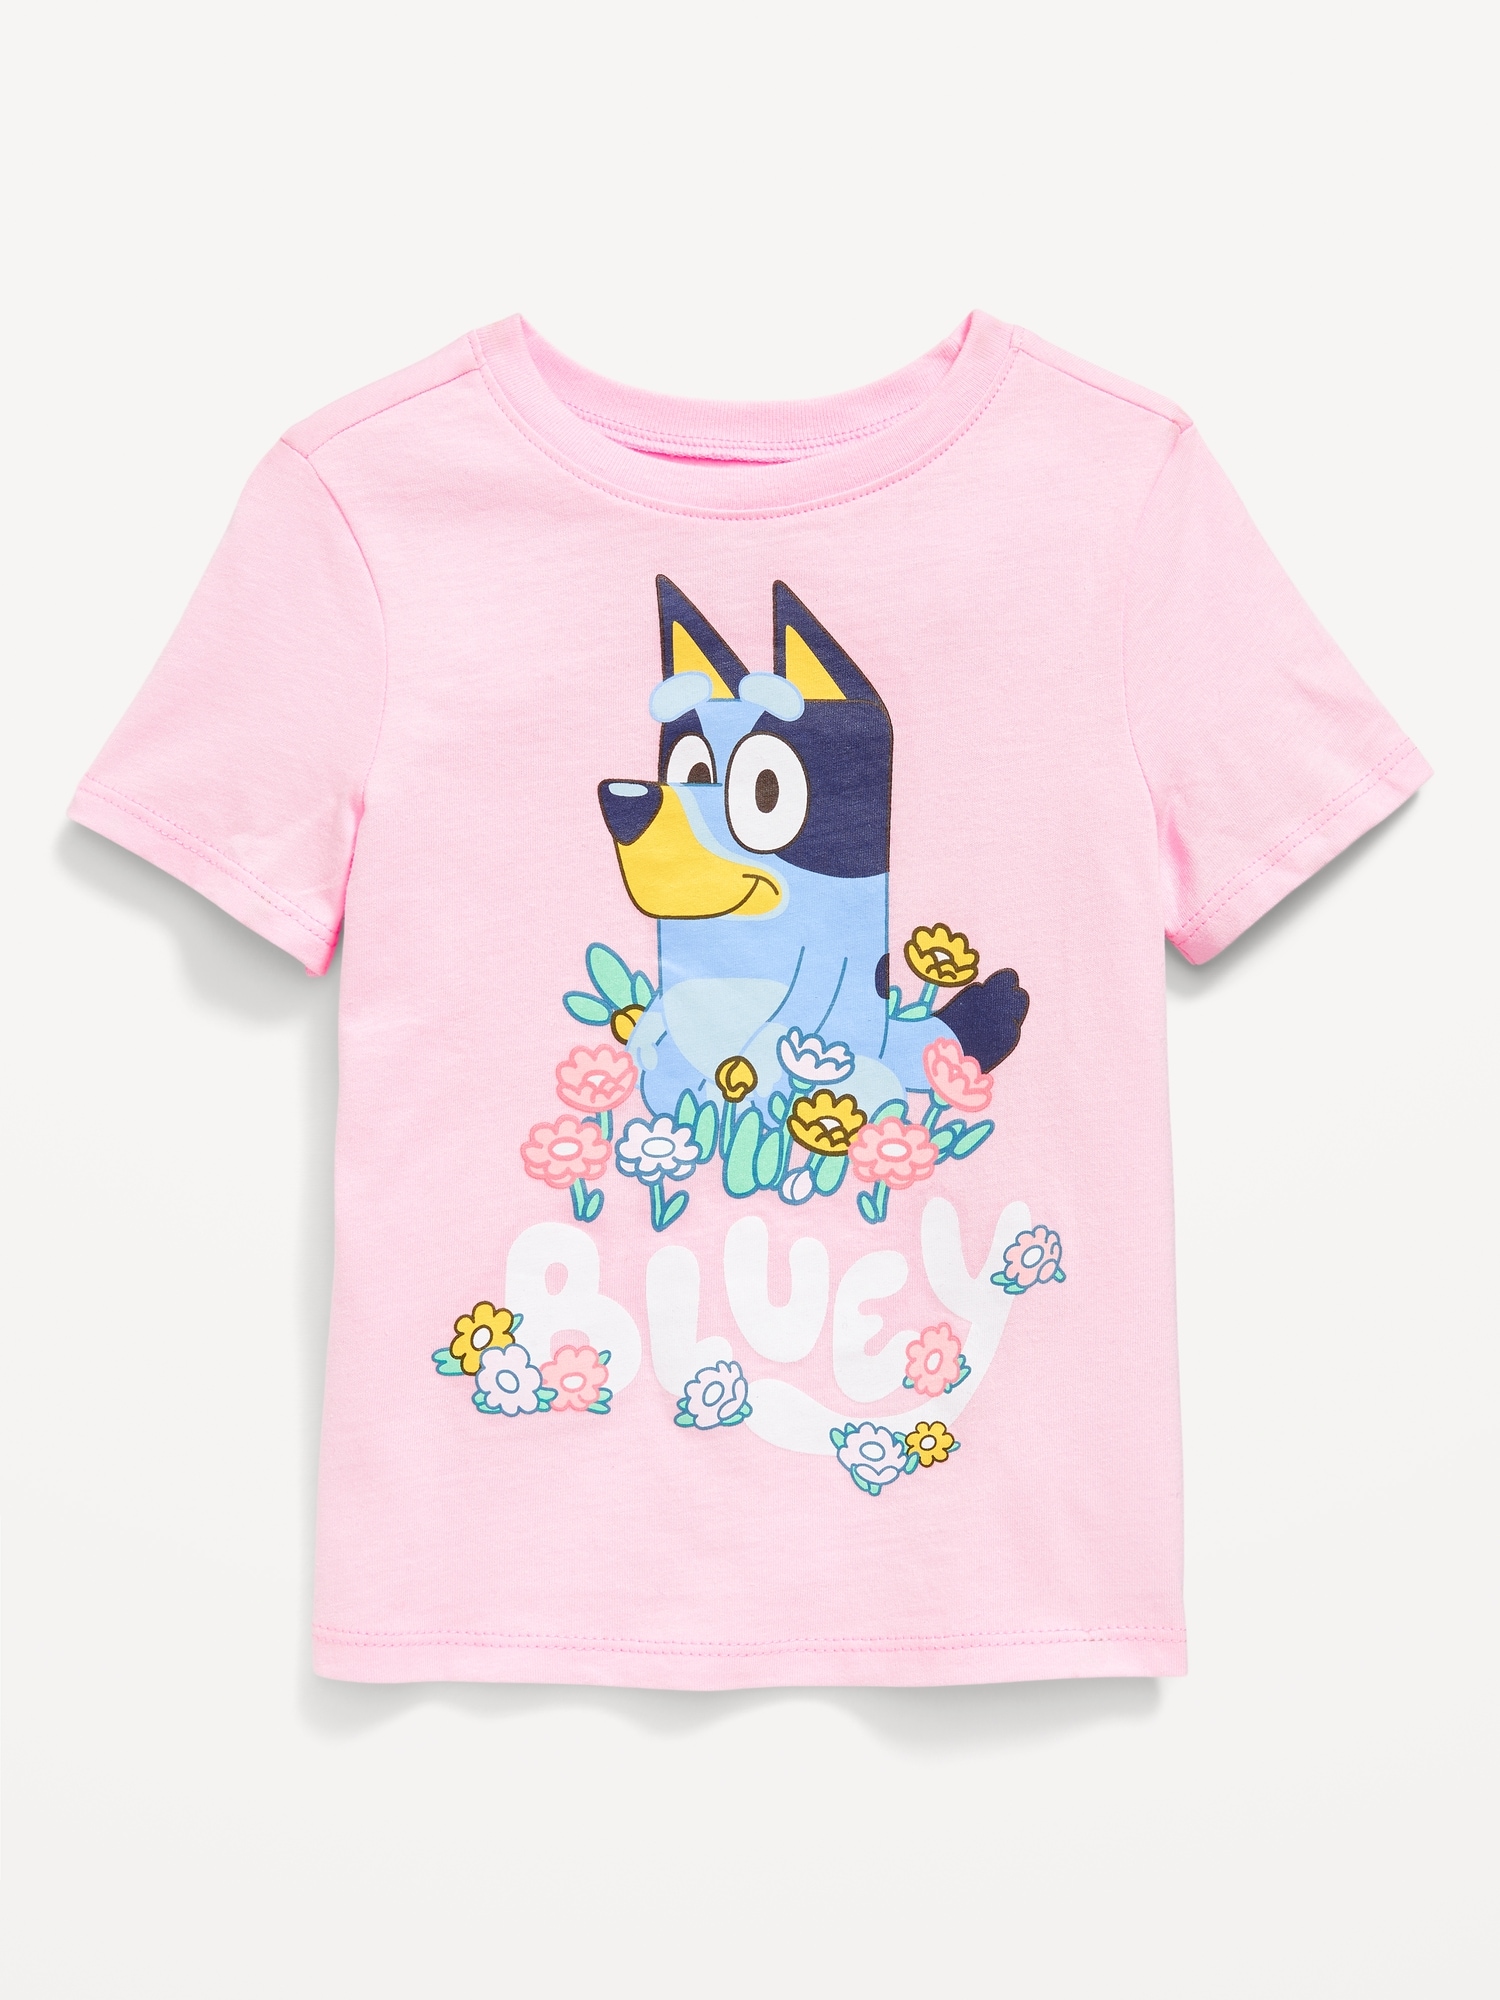 Bluey™ Graphic T-Shirt for Toddler Girls